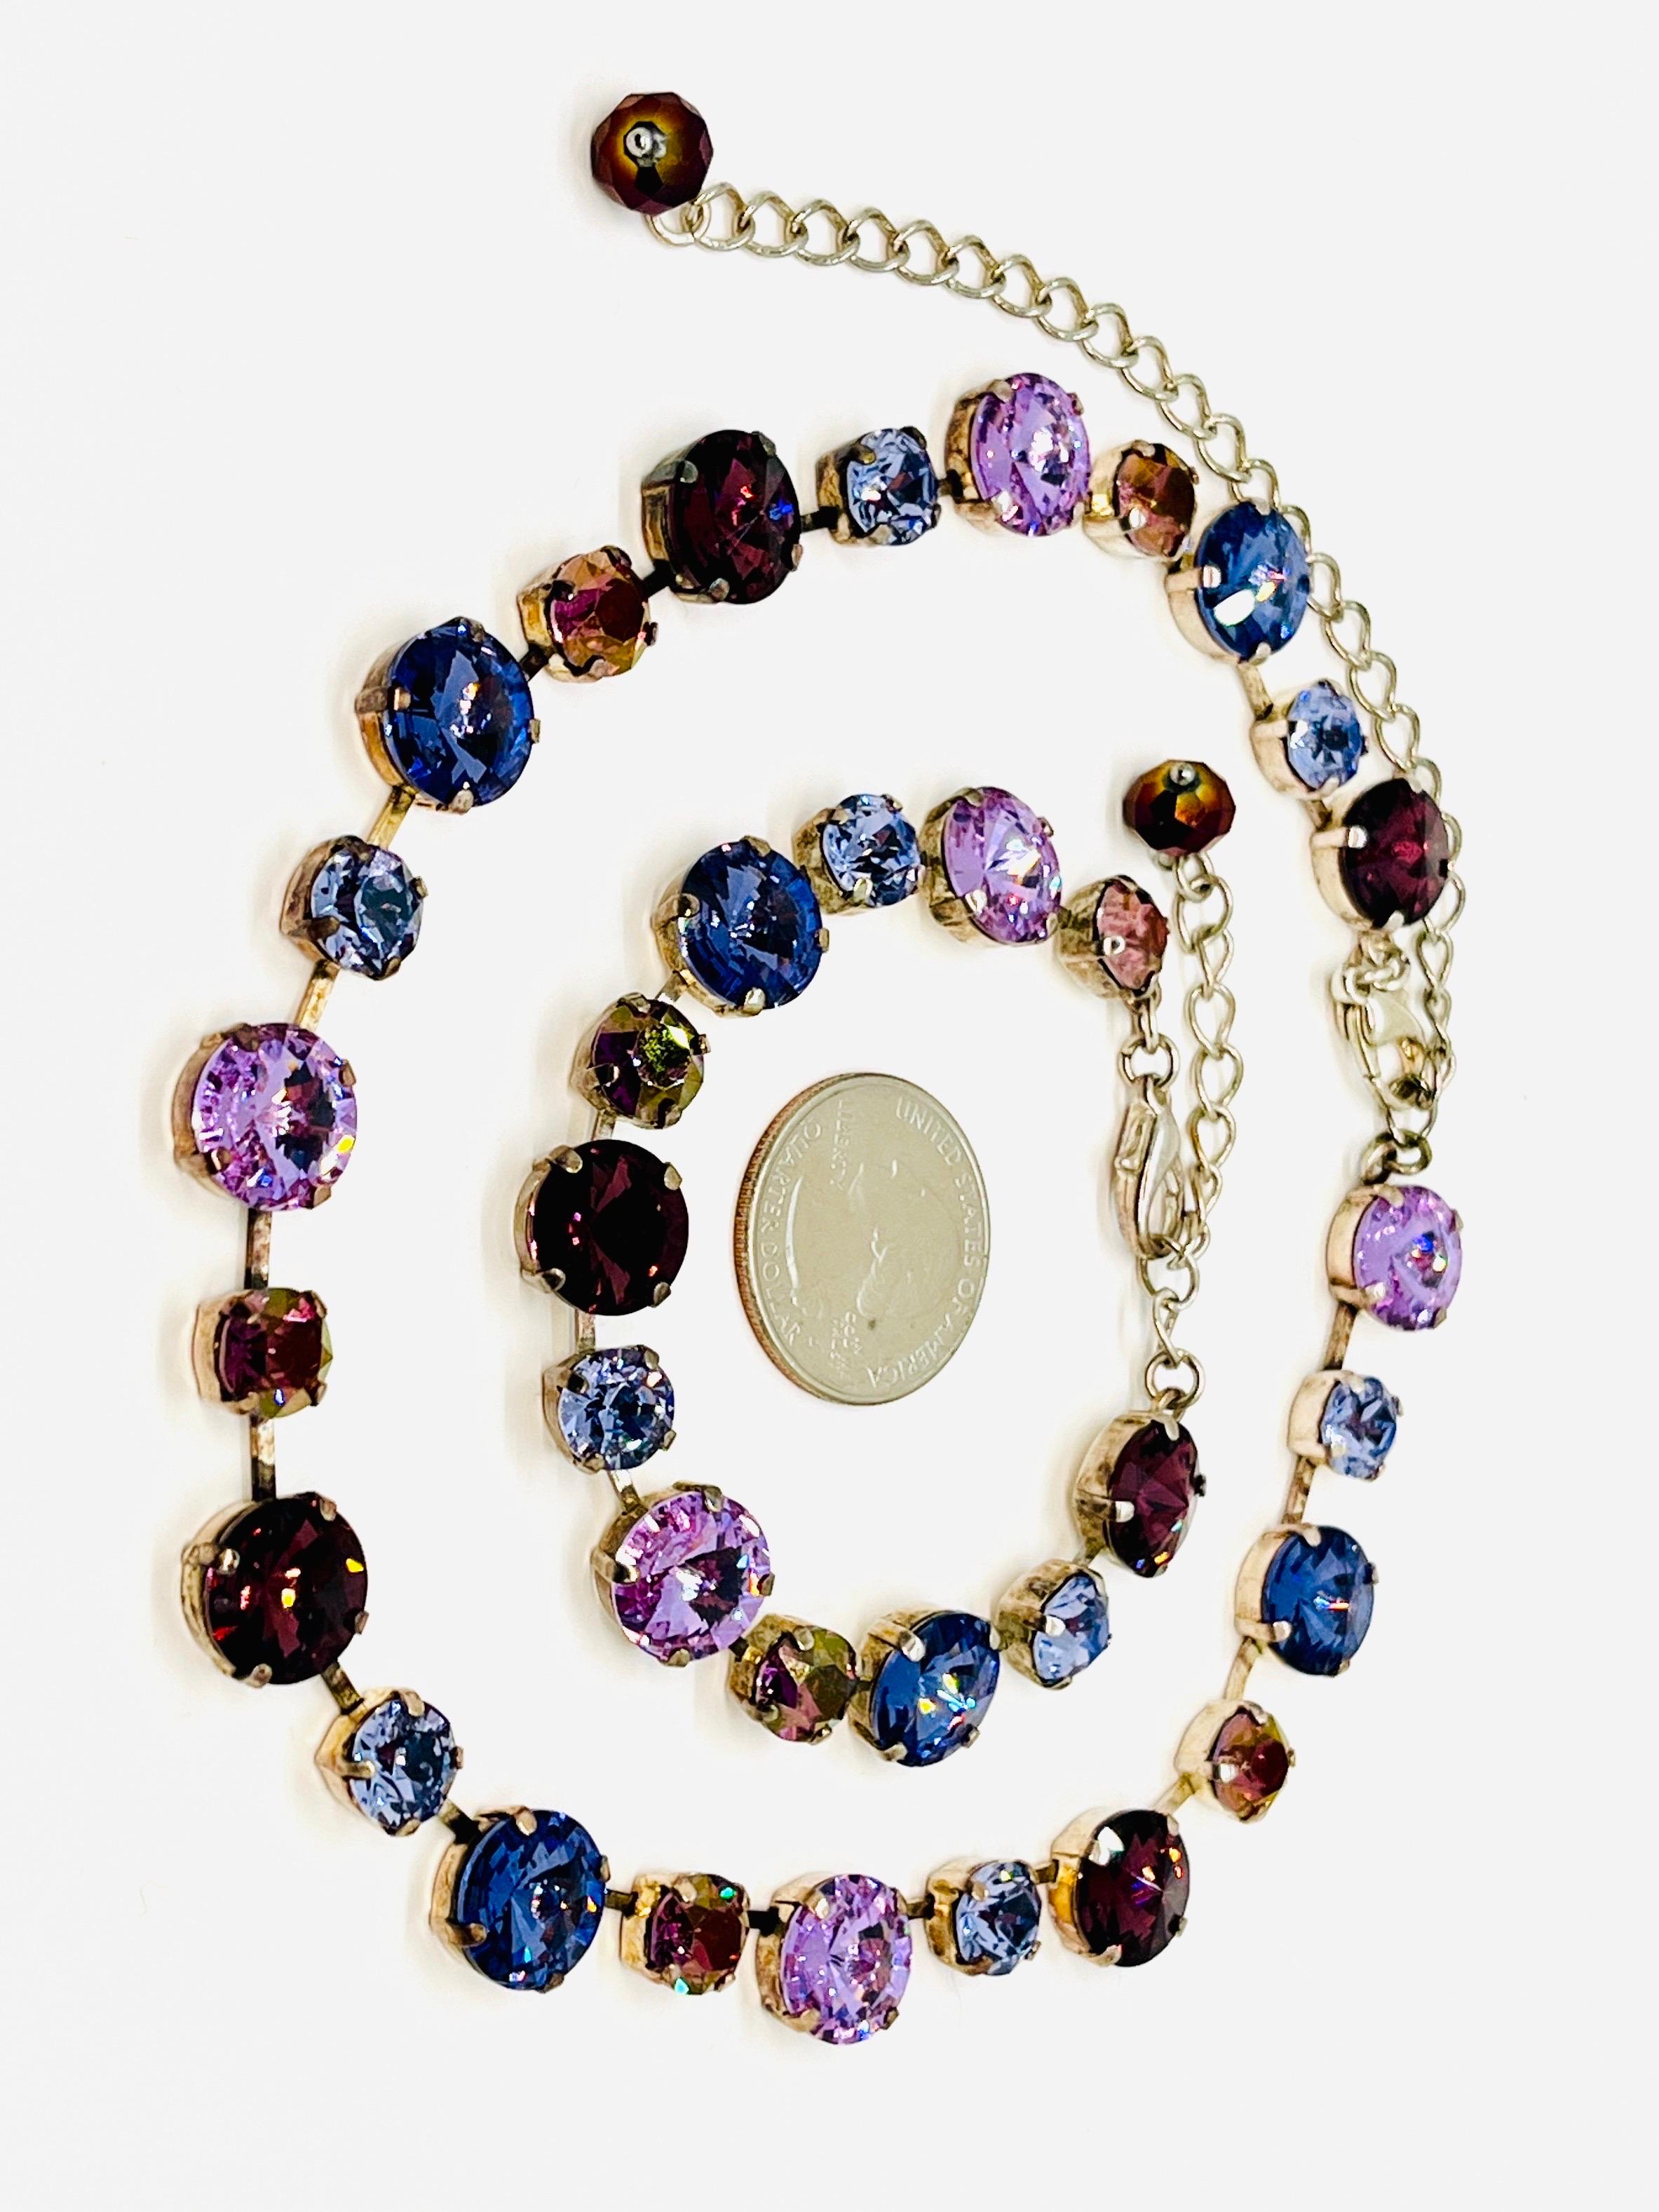 Collar necklace and bracelet multicolor Rivoli cut crystal rhinestone silver cup chain with adjustable chain and lobster clasps. Necklace can be adjusted from 13.5